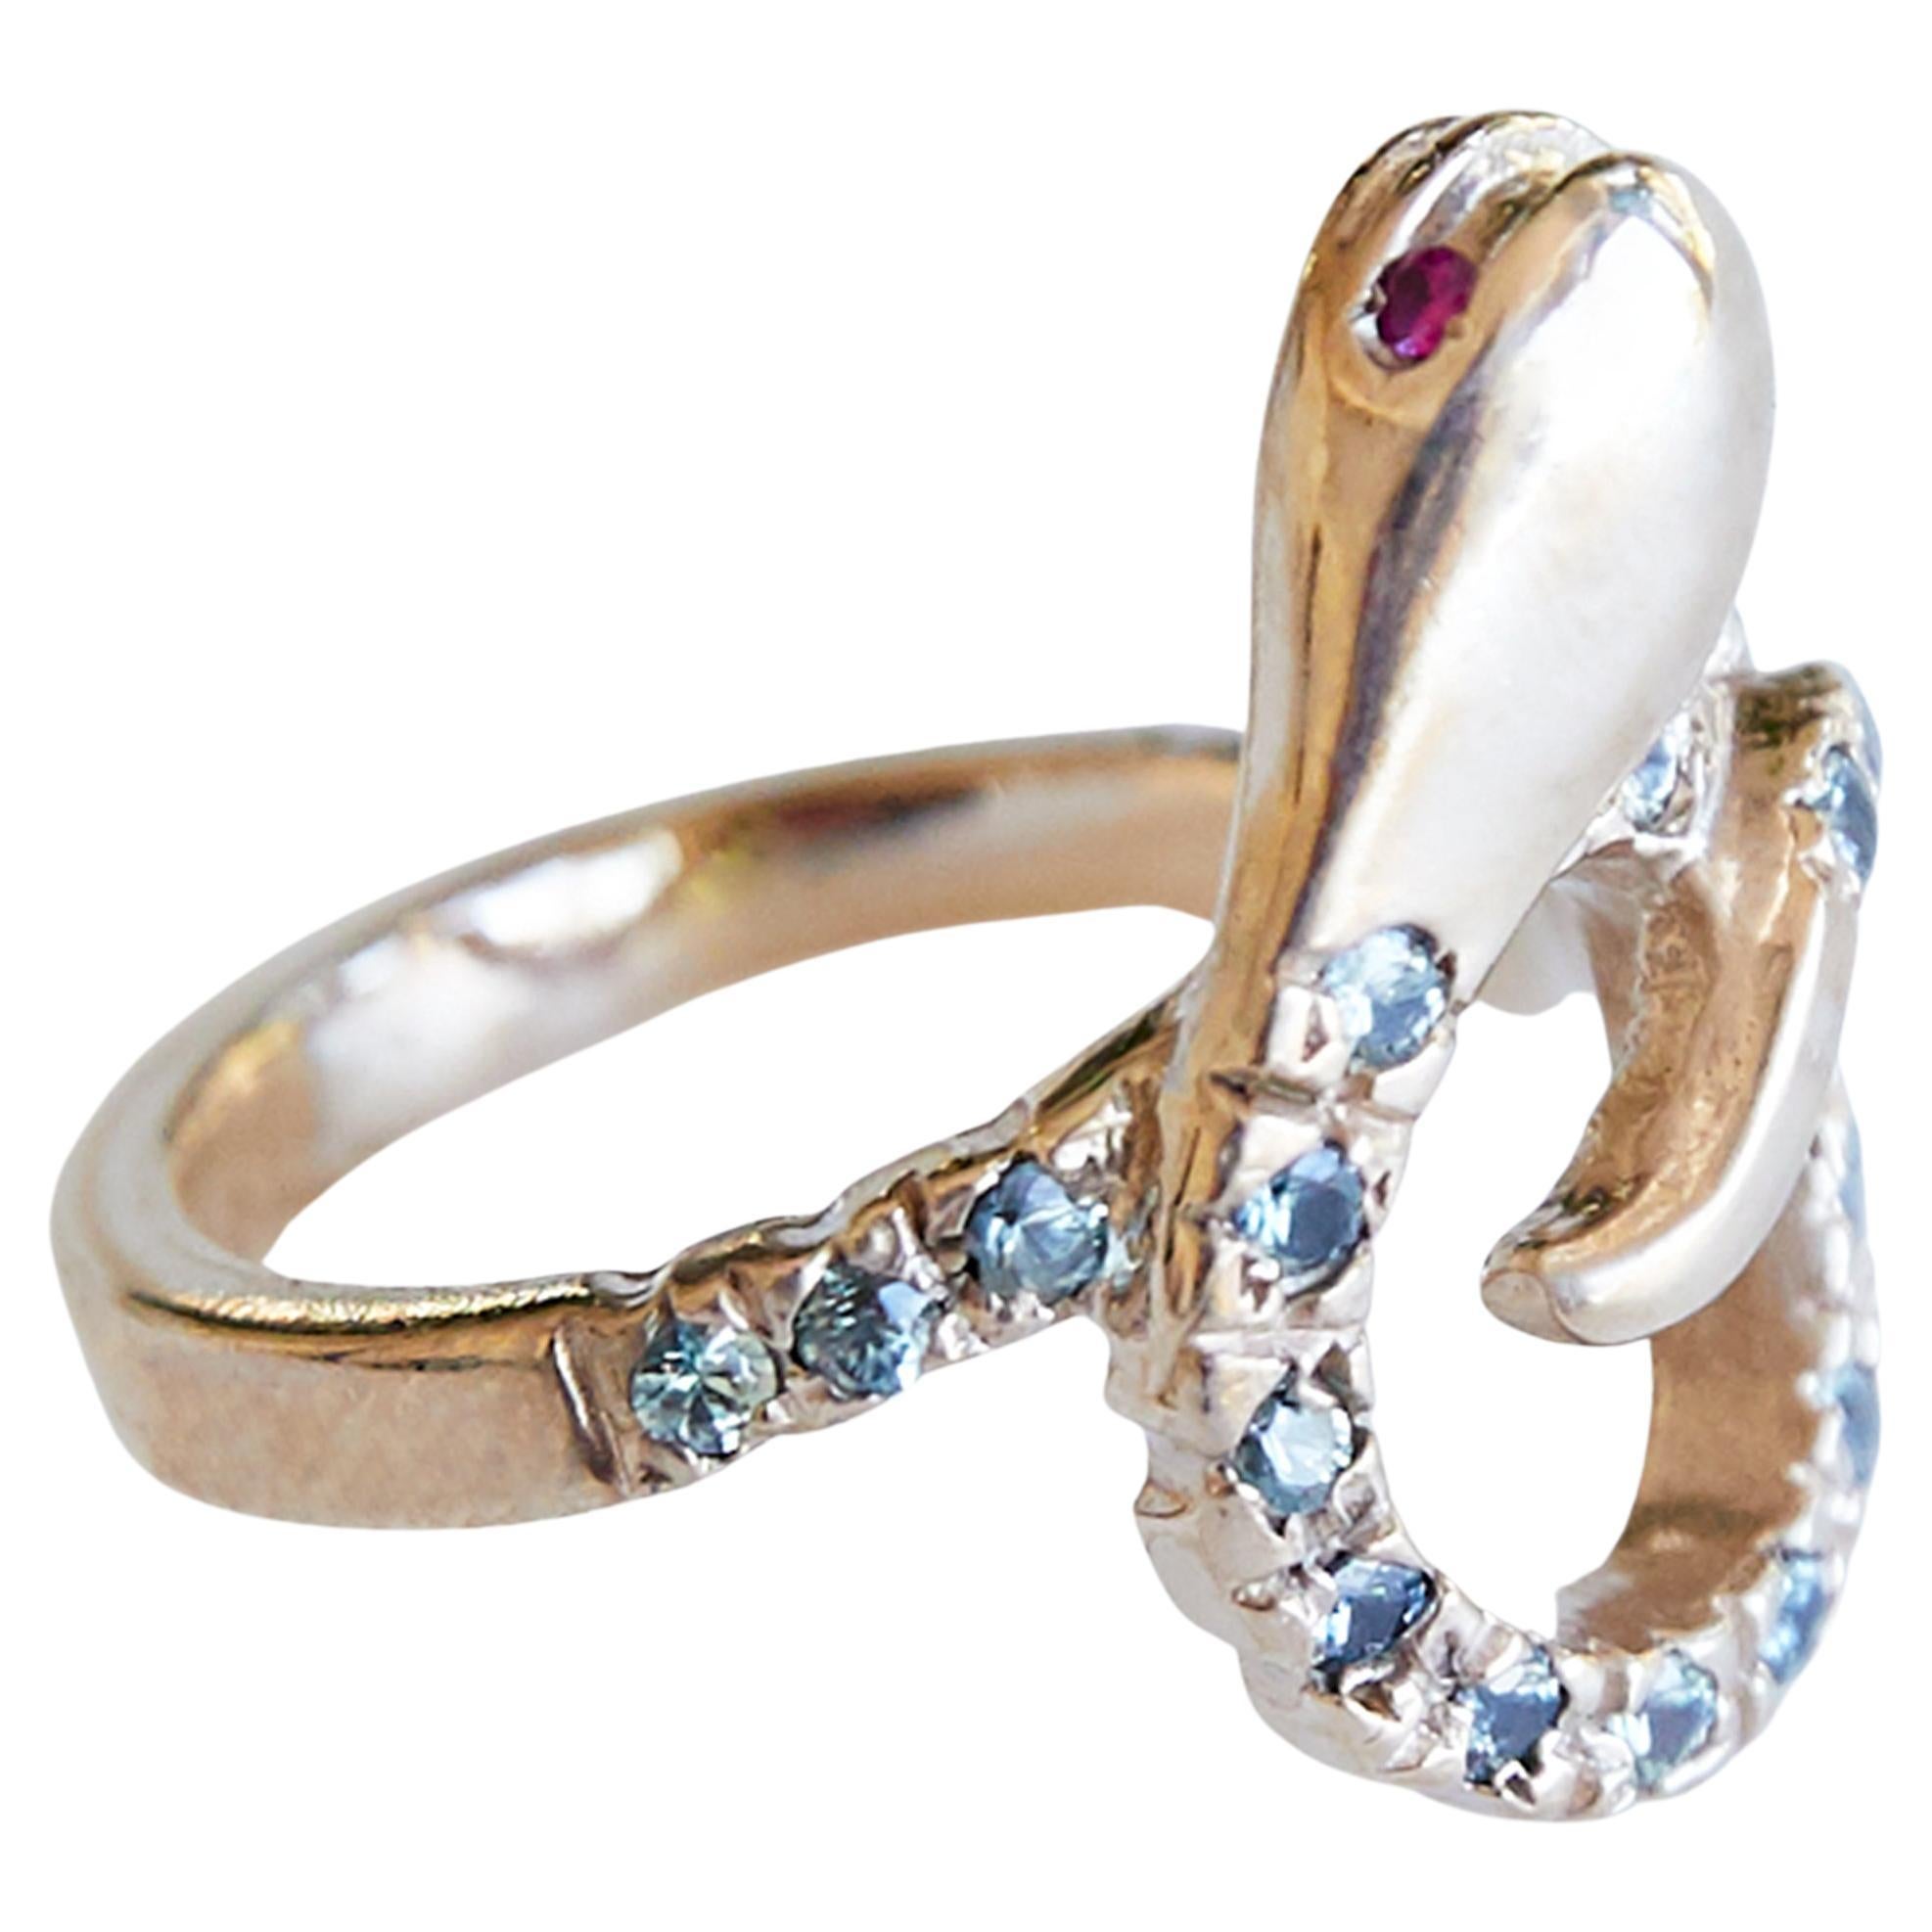 Animal jewelry Green Sapphire Ruby Gold Snake Cocktail Ring Victorian Style J Dauphin
This gem has 29 Sapphires and 2 Ruby Eyes
14 k Gold

J DAUPHIN 